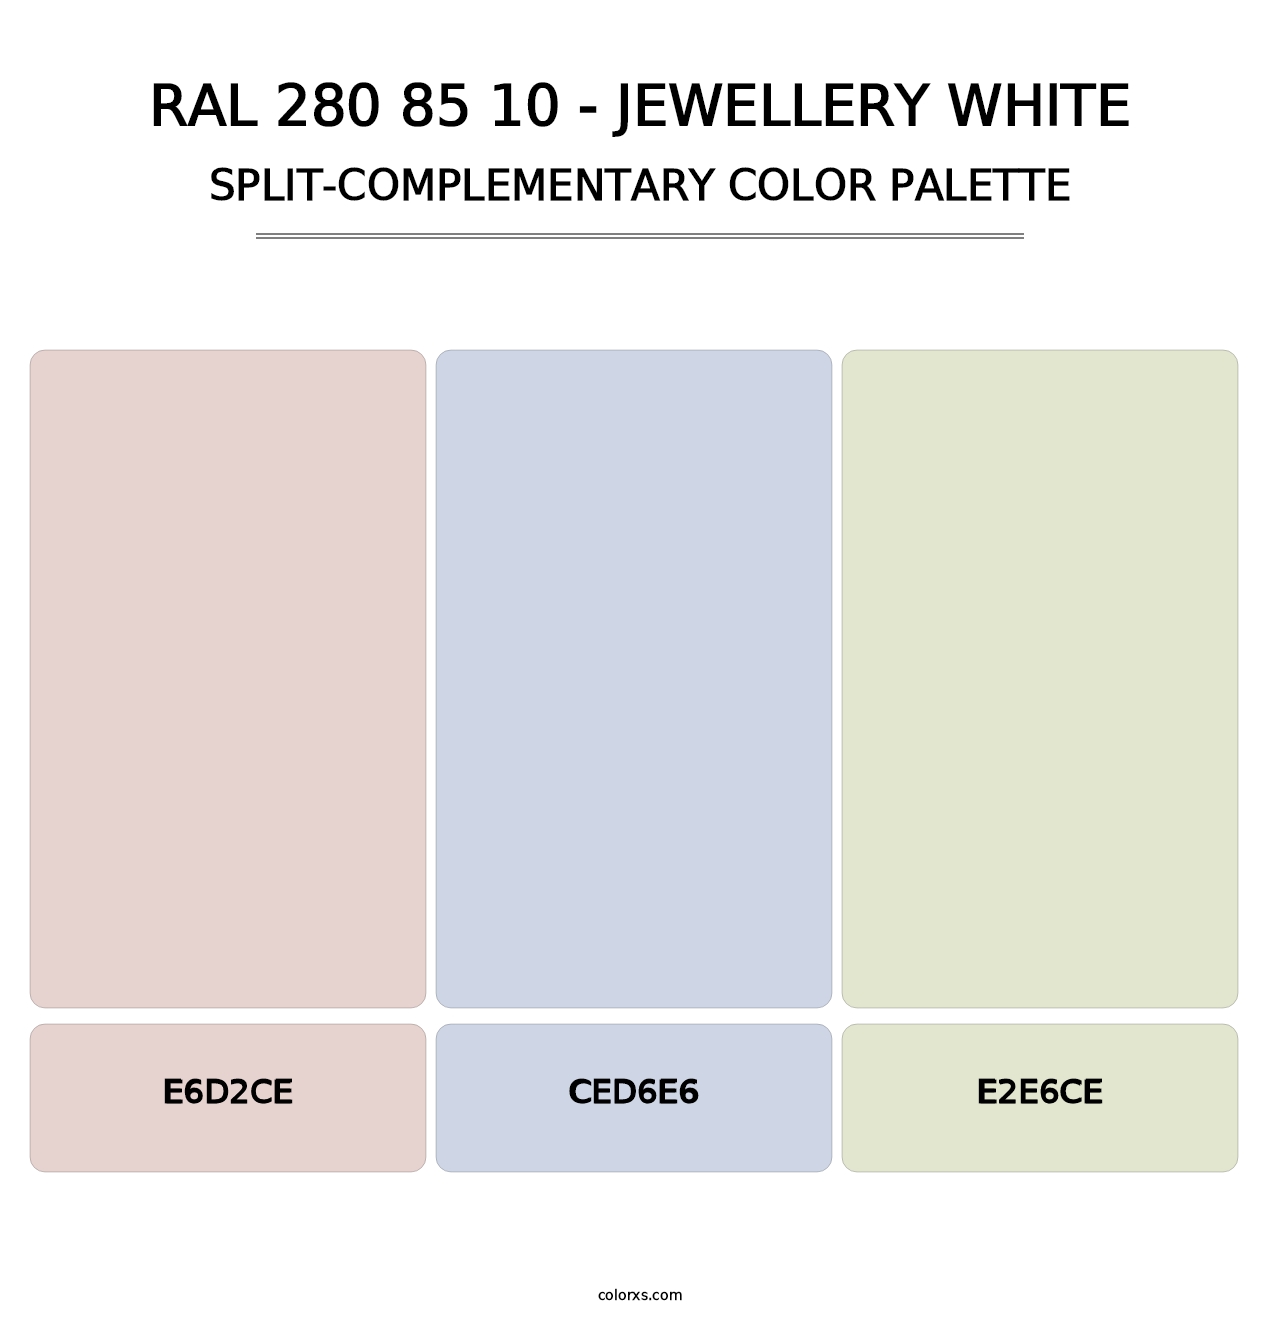 RAL 280 85 10 - Jewellery White - Split-Complementary Color Palette